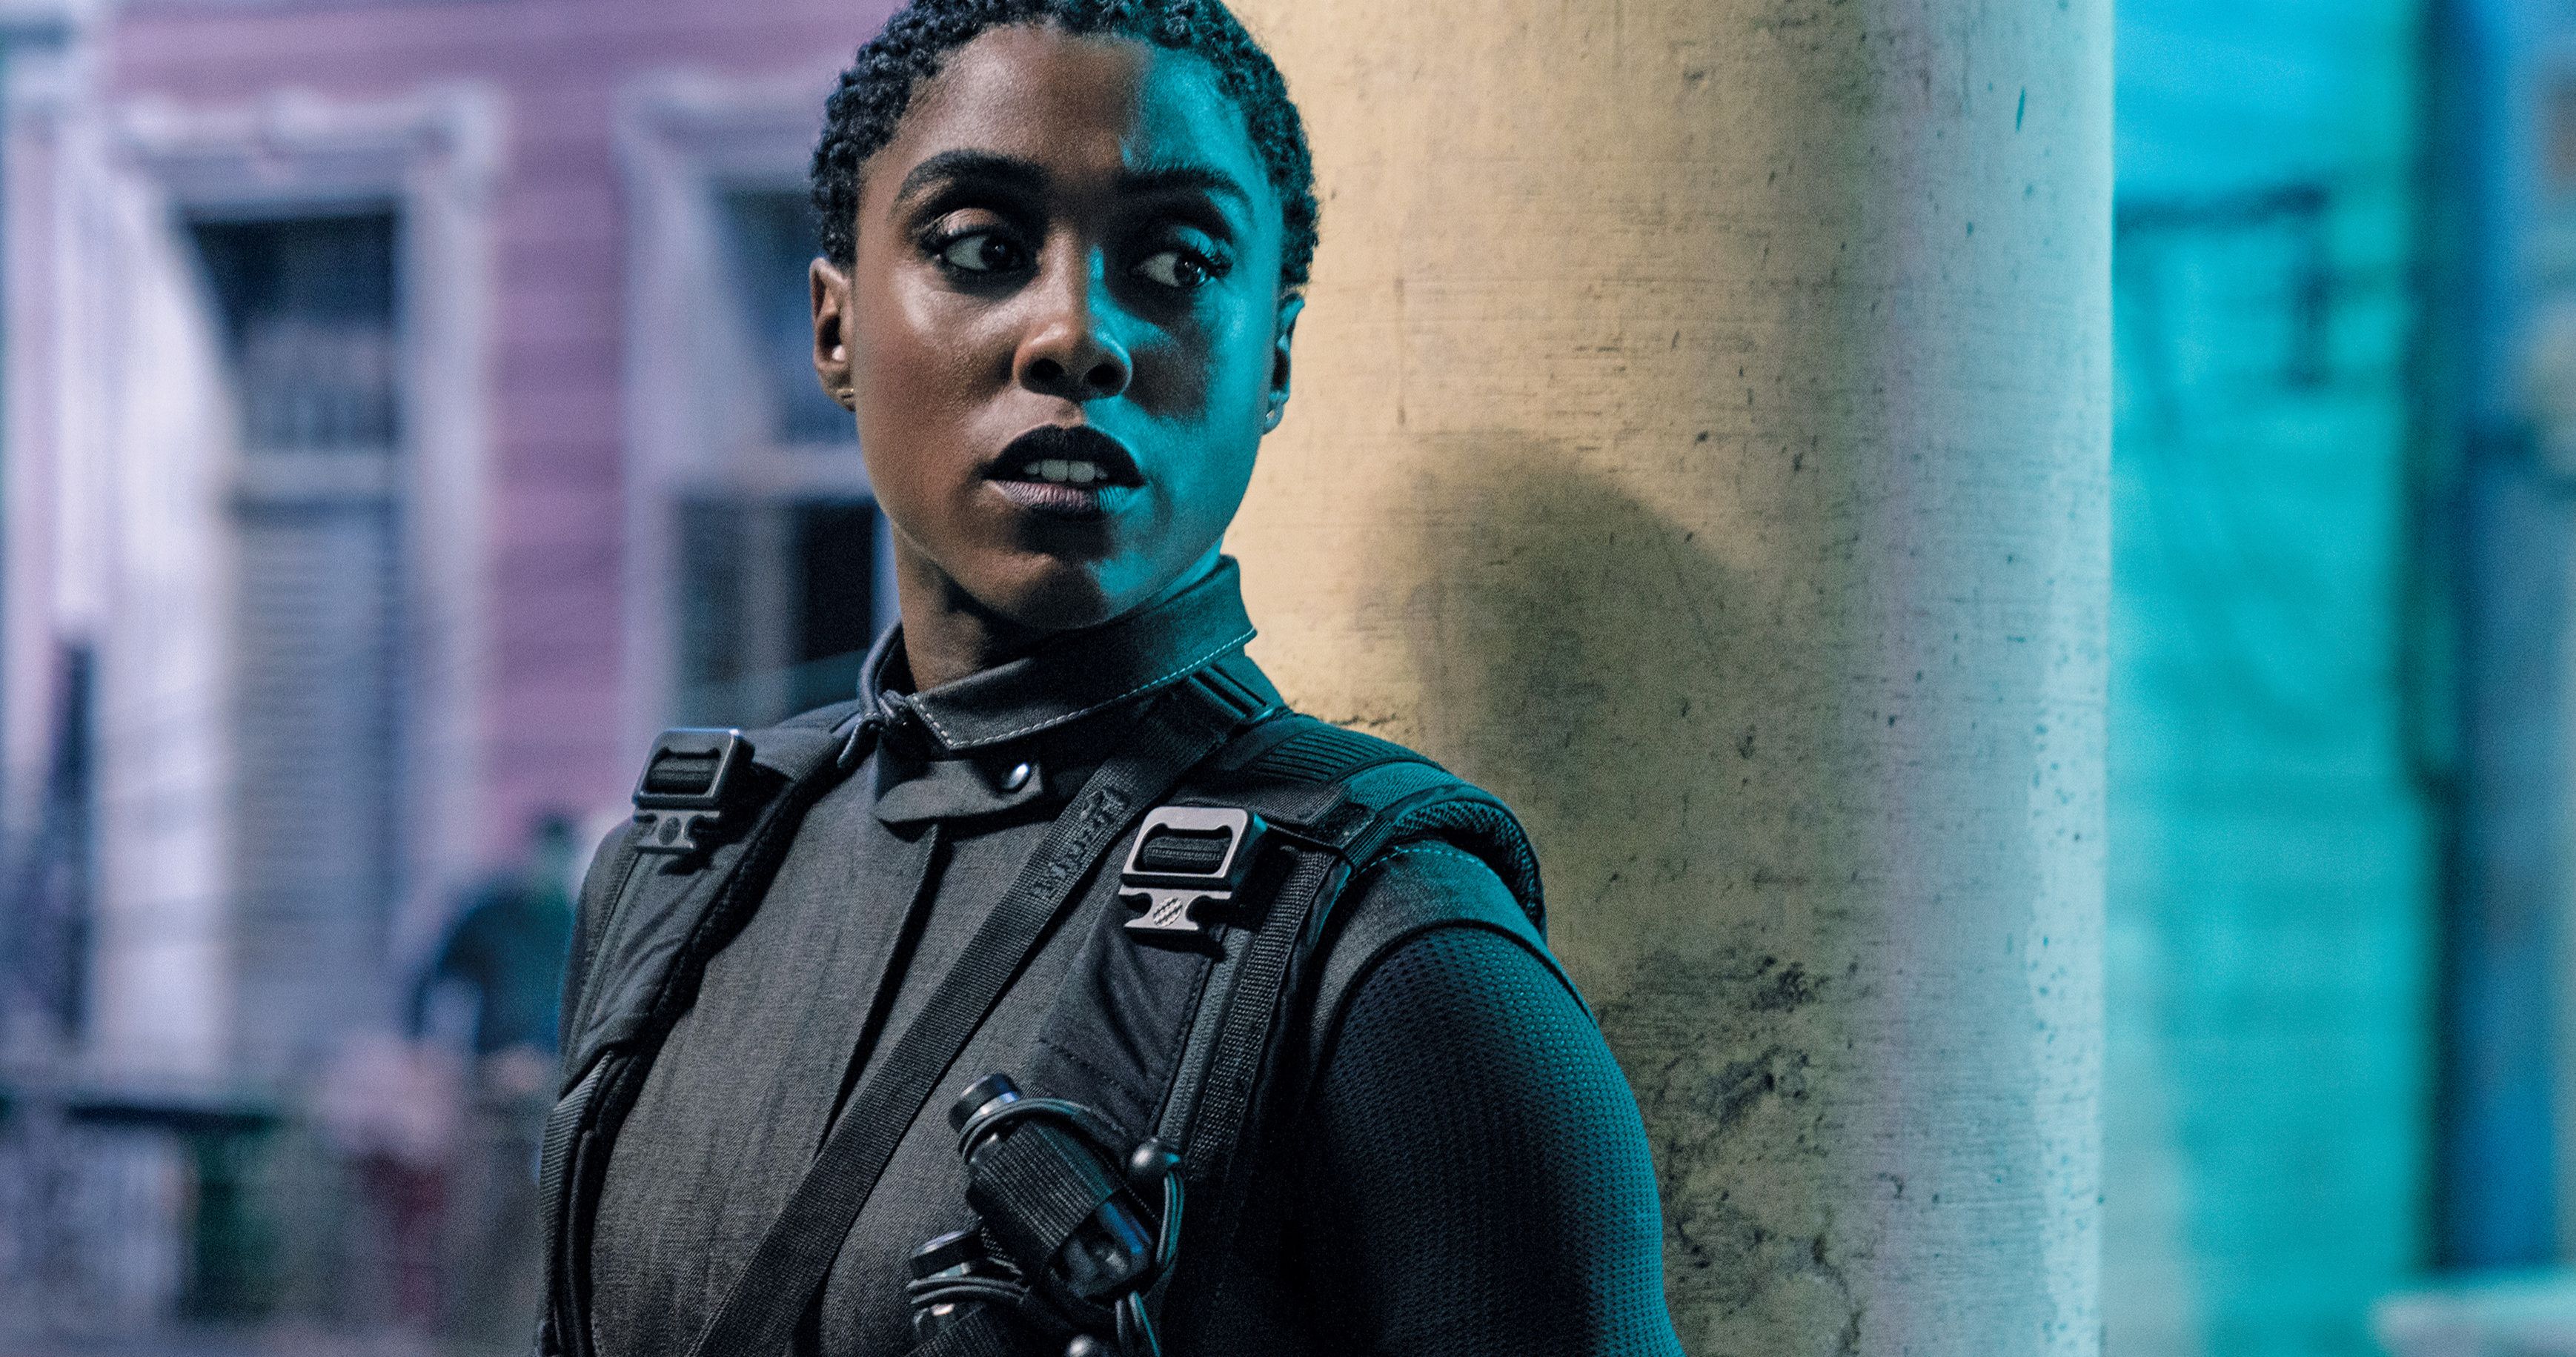 No Time to Die Brings a Sense of Empowerment to the Traditional Bond Girl Says Lashana Lynch